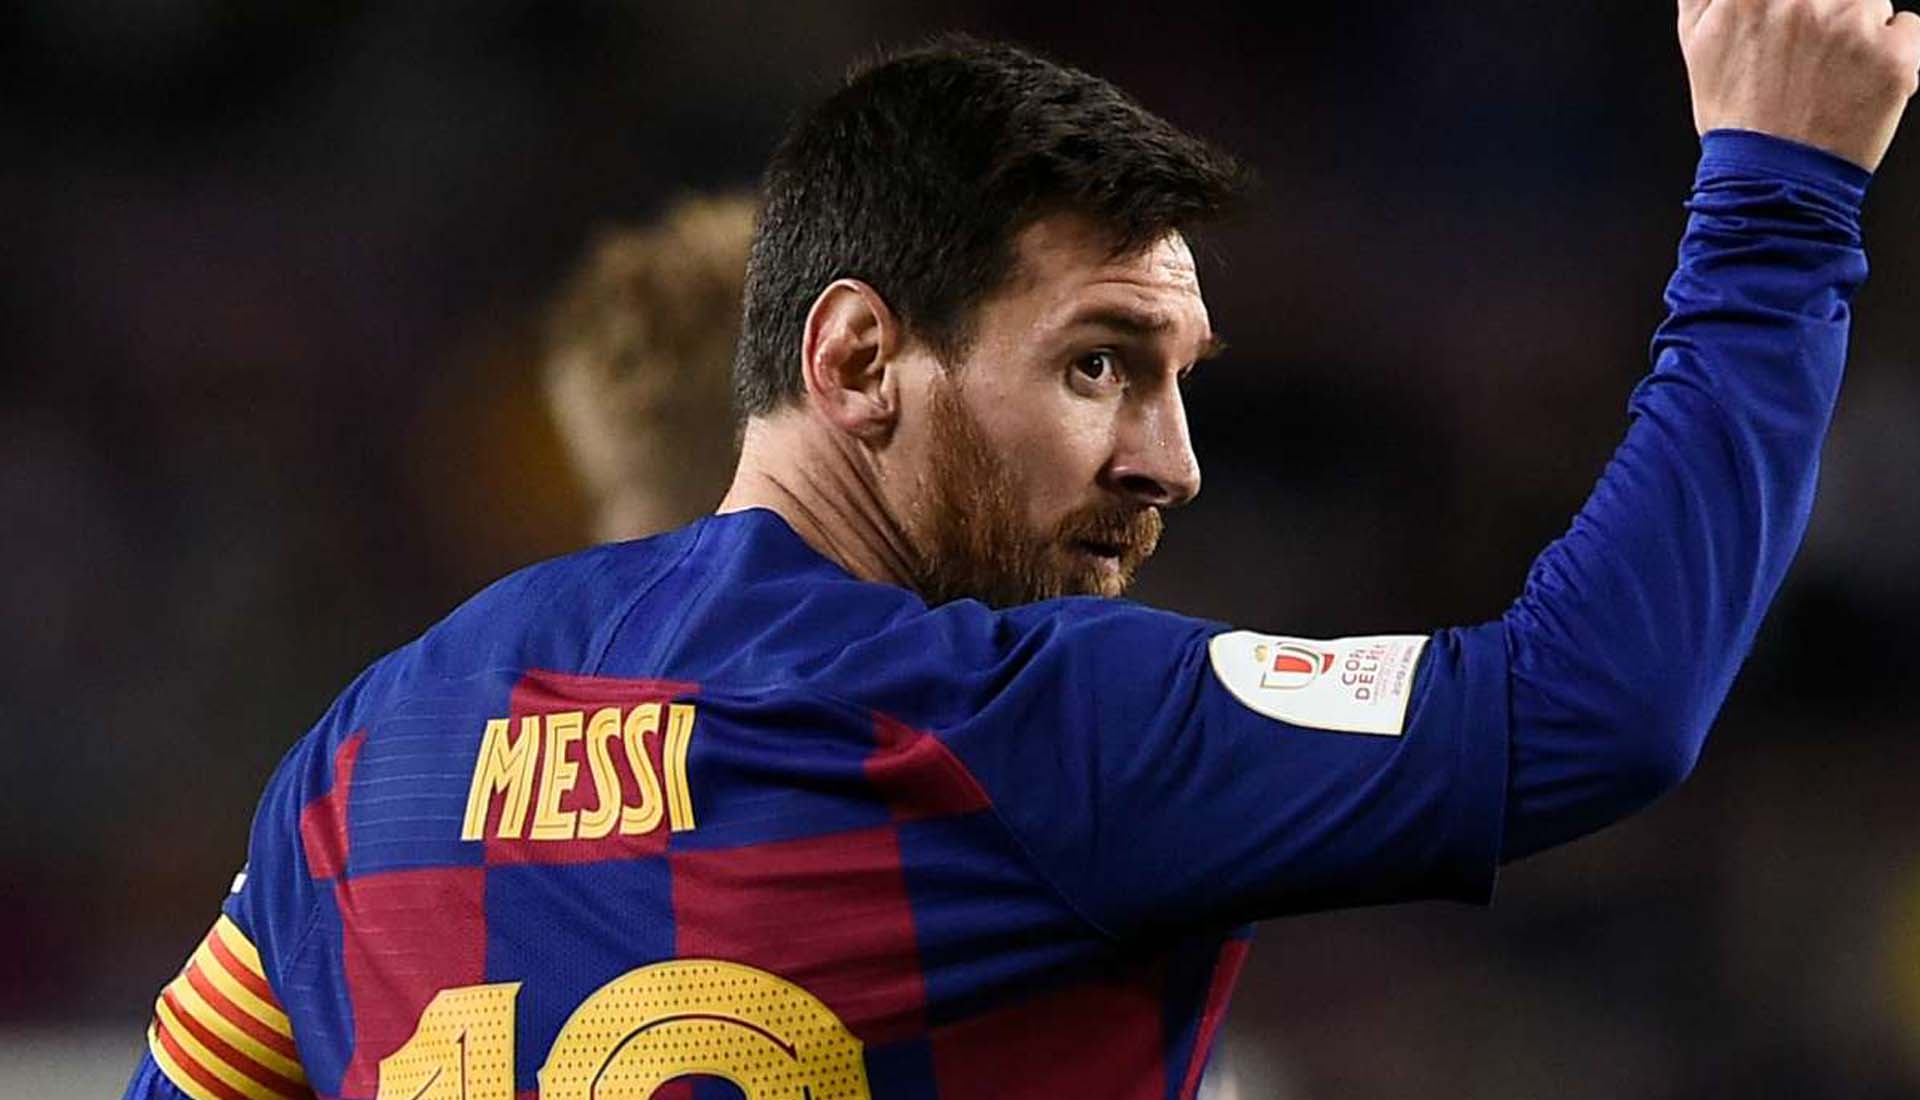 Messi v Ronaldo: The Real Winners From Their Record Shirt Sales -  SoccerBible